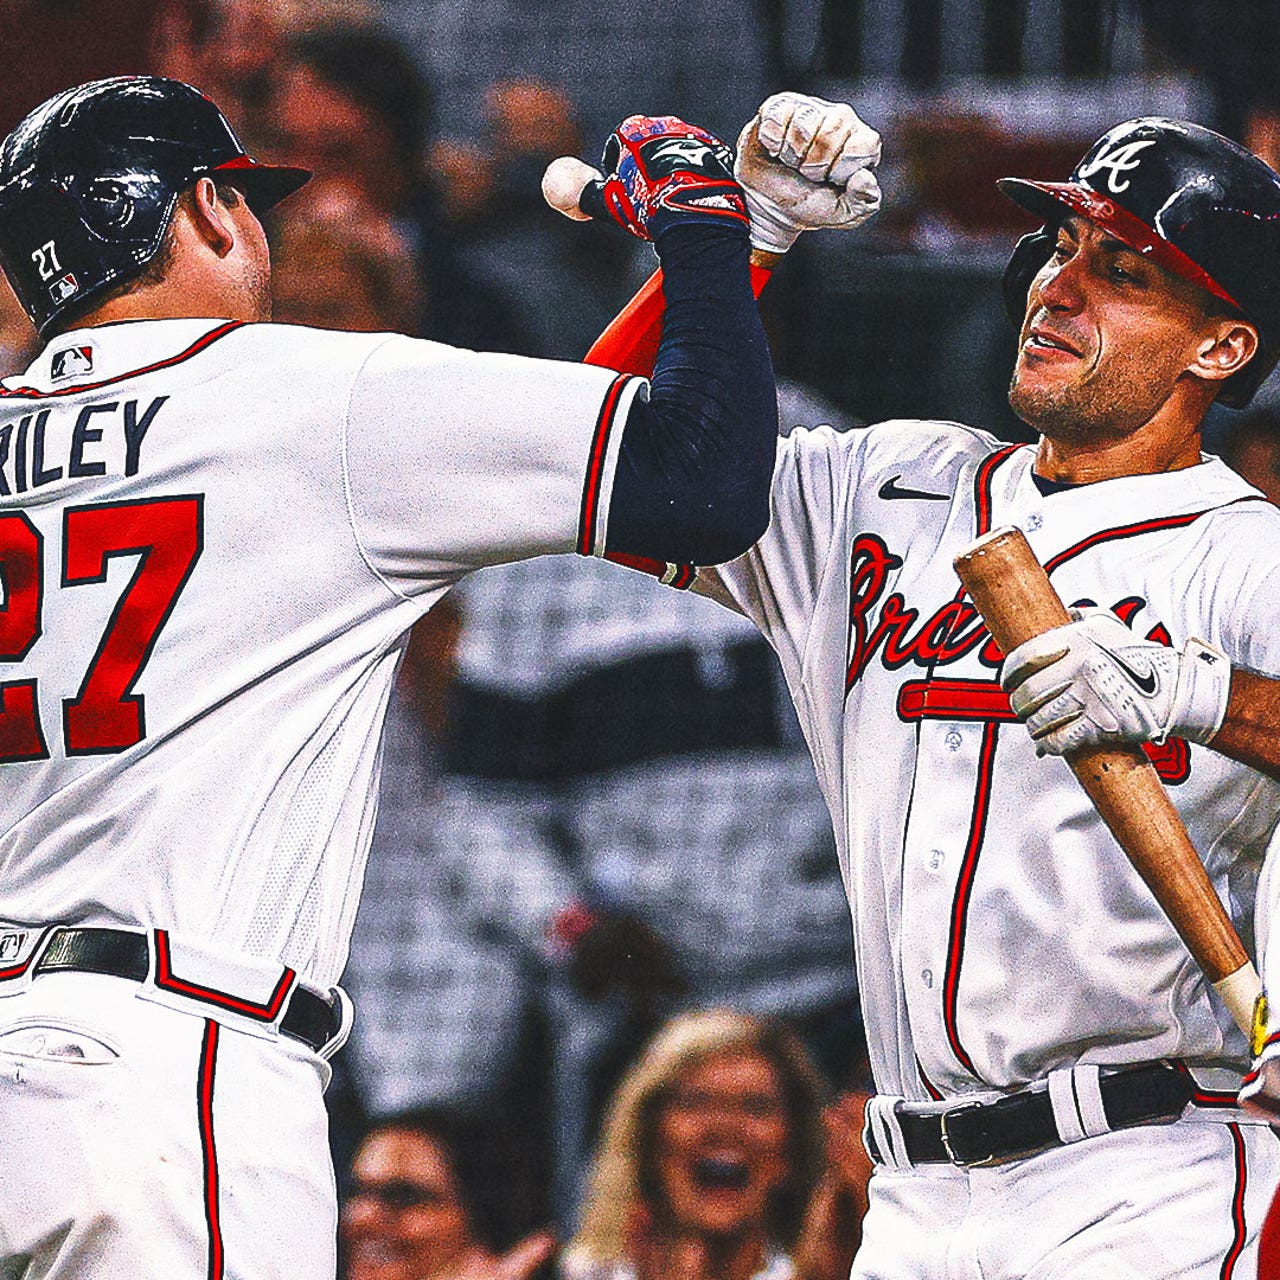 Harris' late blast lifts Braves to 4-3 win over Marlins